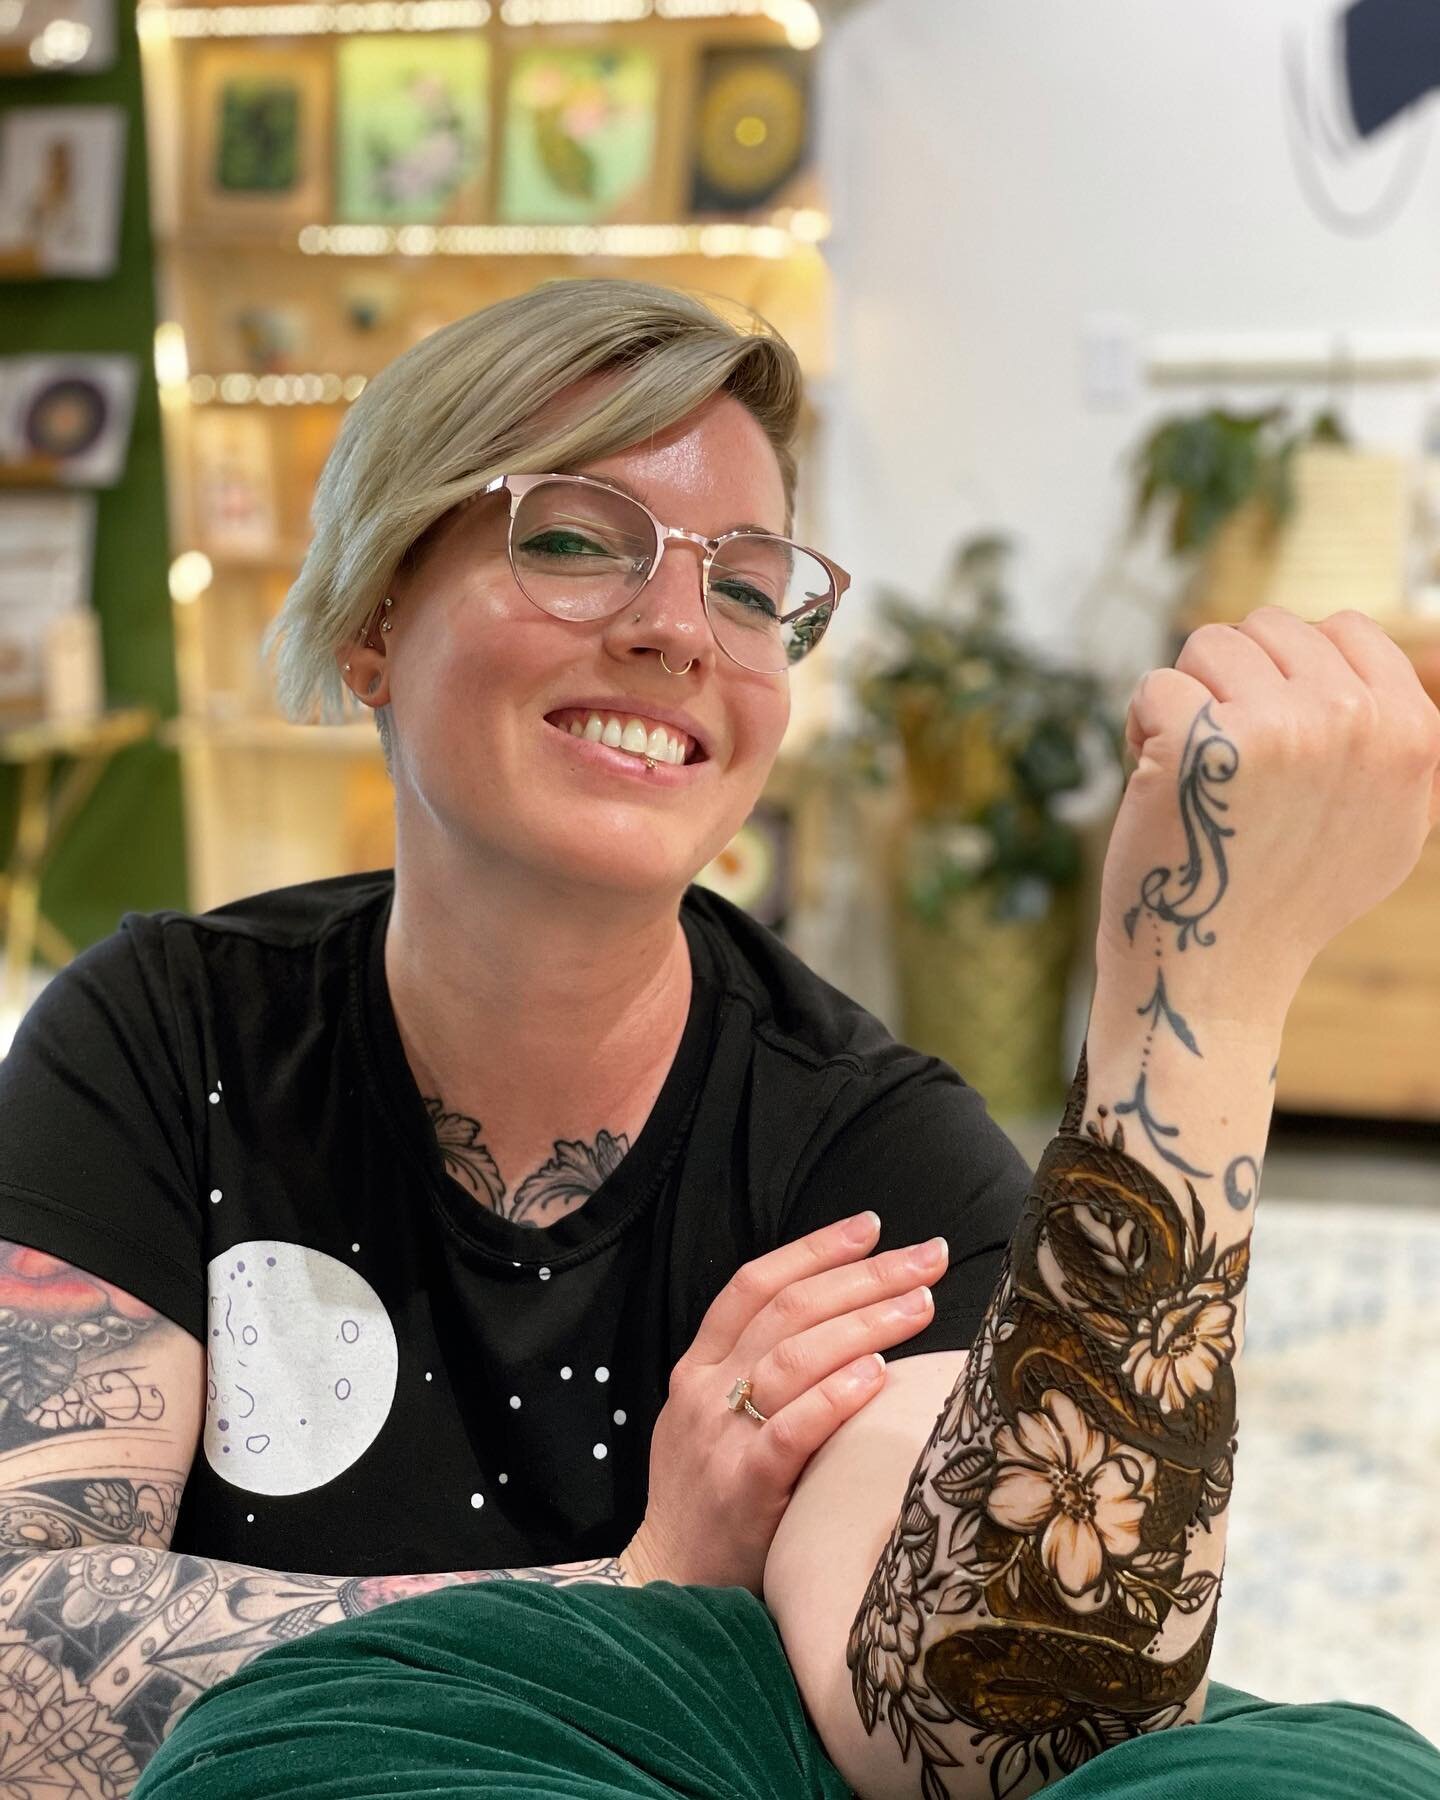 This lovely friend was so much fun to hang with during her tattoo trial session! 
We talked and geeked out over things the entire time and had a blast throughout all of it! Swipe to see close ups and on the verrrry last page a stain update! My favori